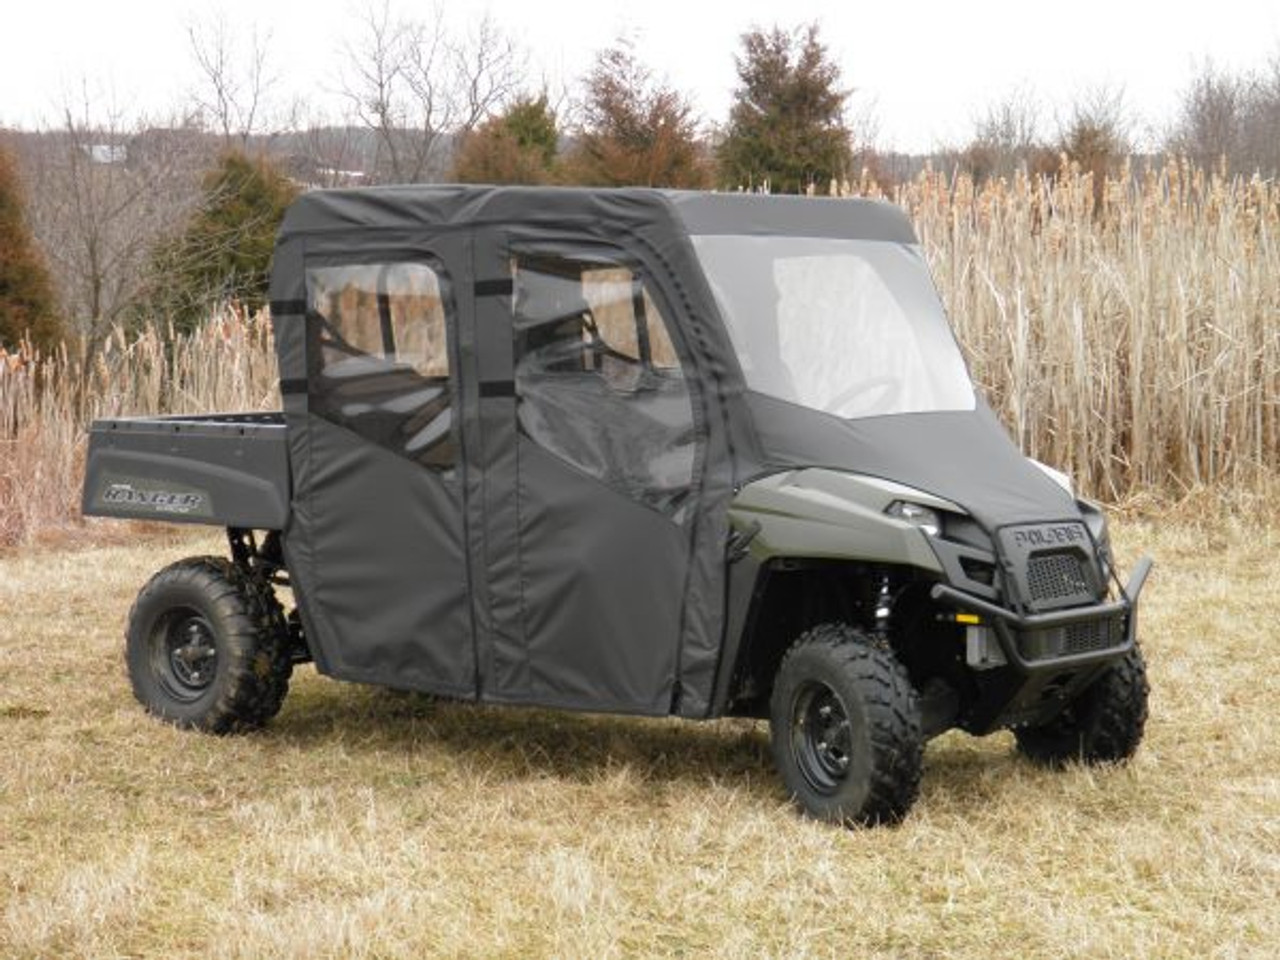 3 Star side x side Polaris Ranger Mid-Size Crew 500/570 full cab enclosure with vinyl windshield side angle view